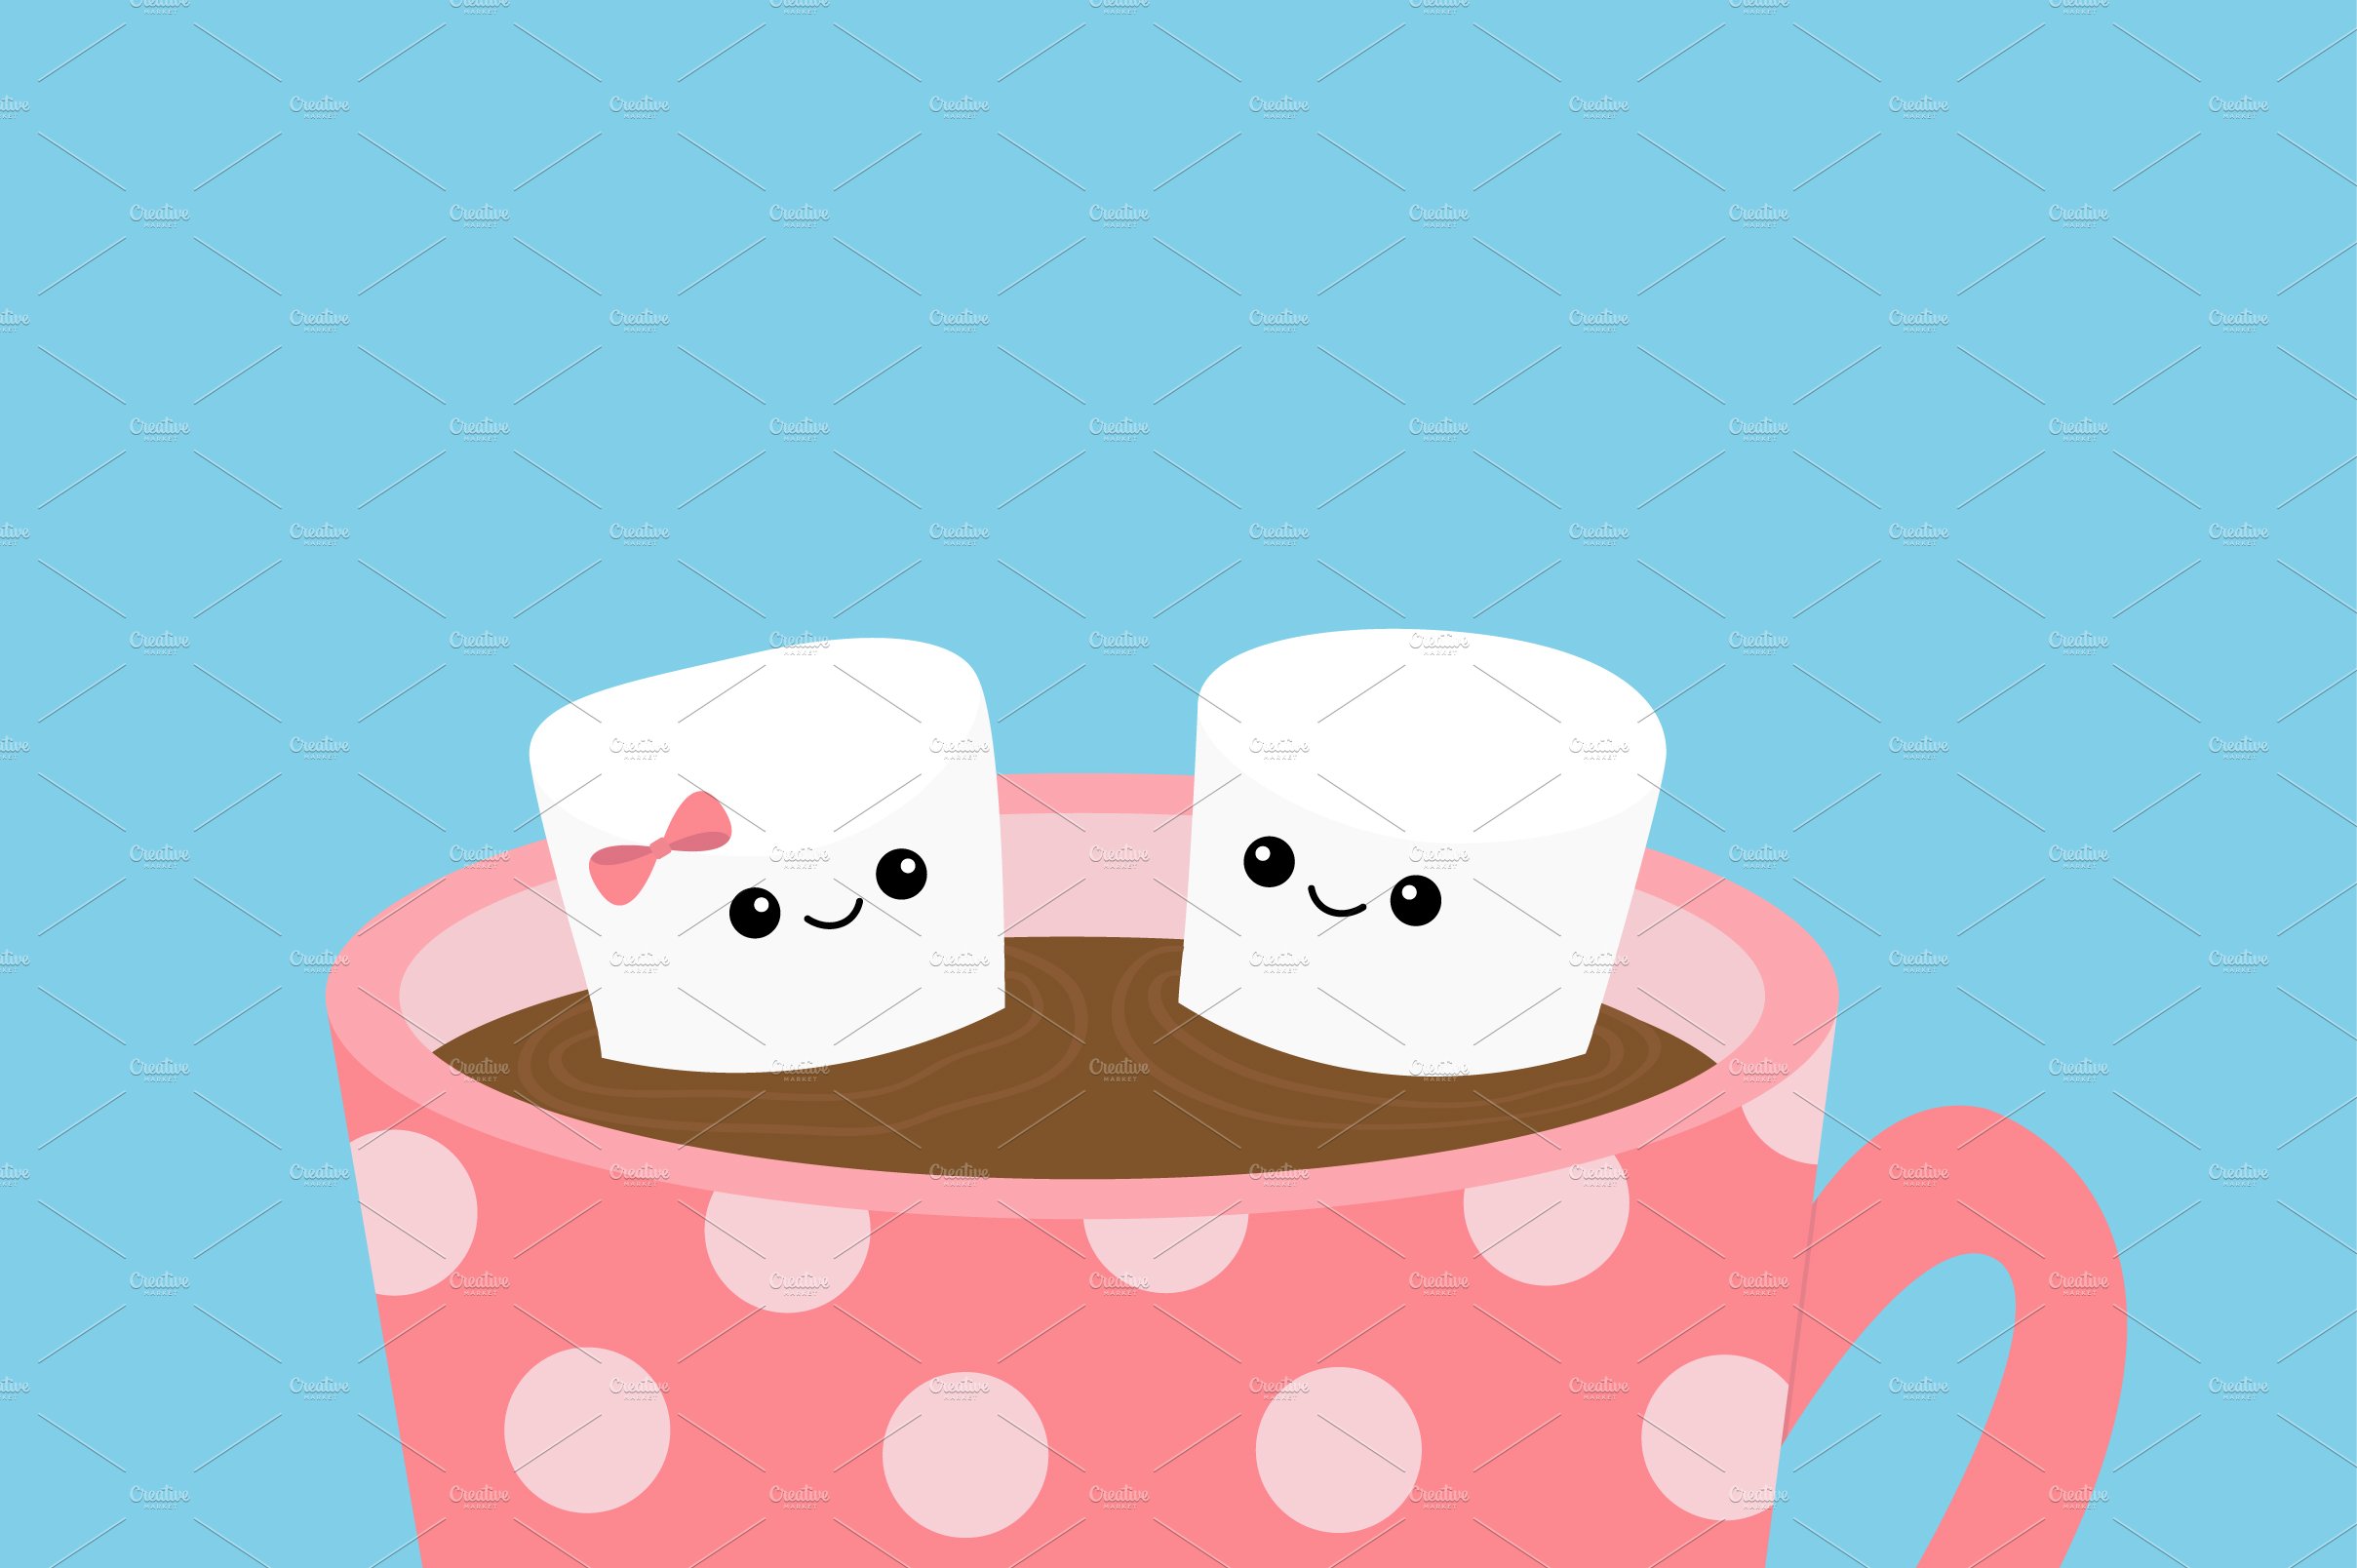 Marshmallows taking a bath in a cup cover image.